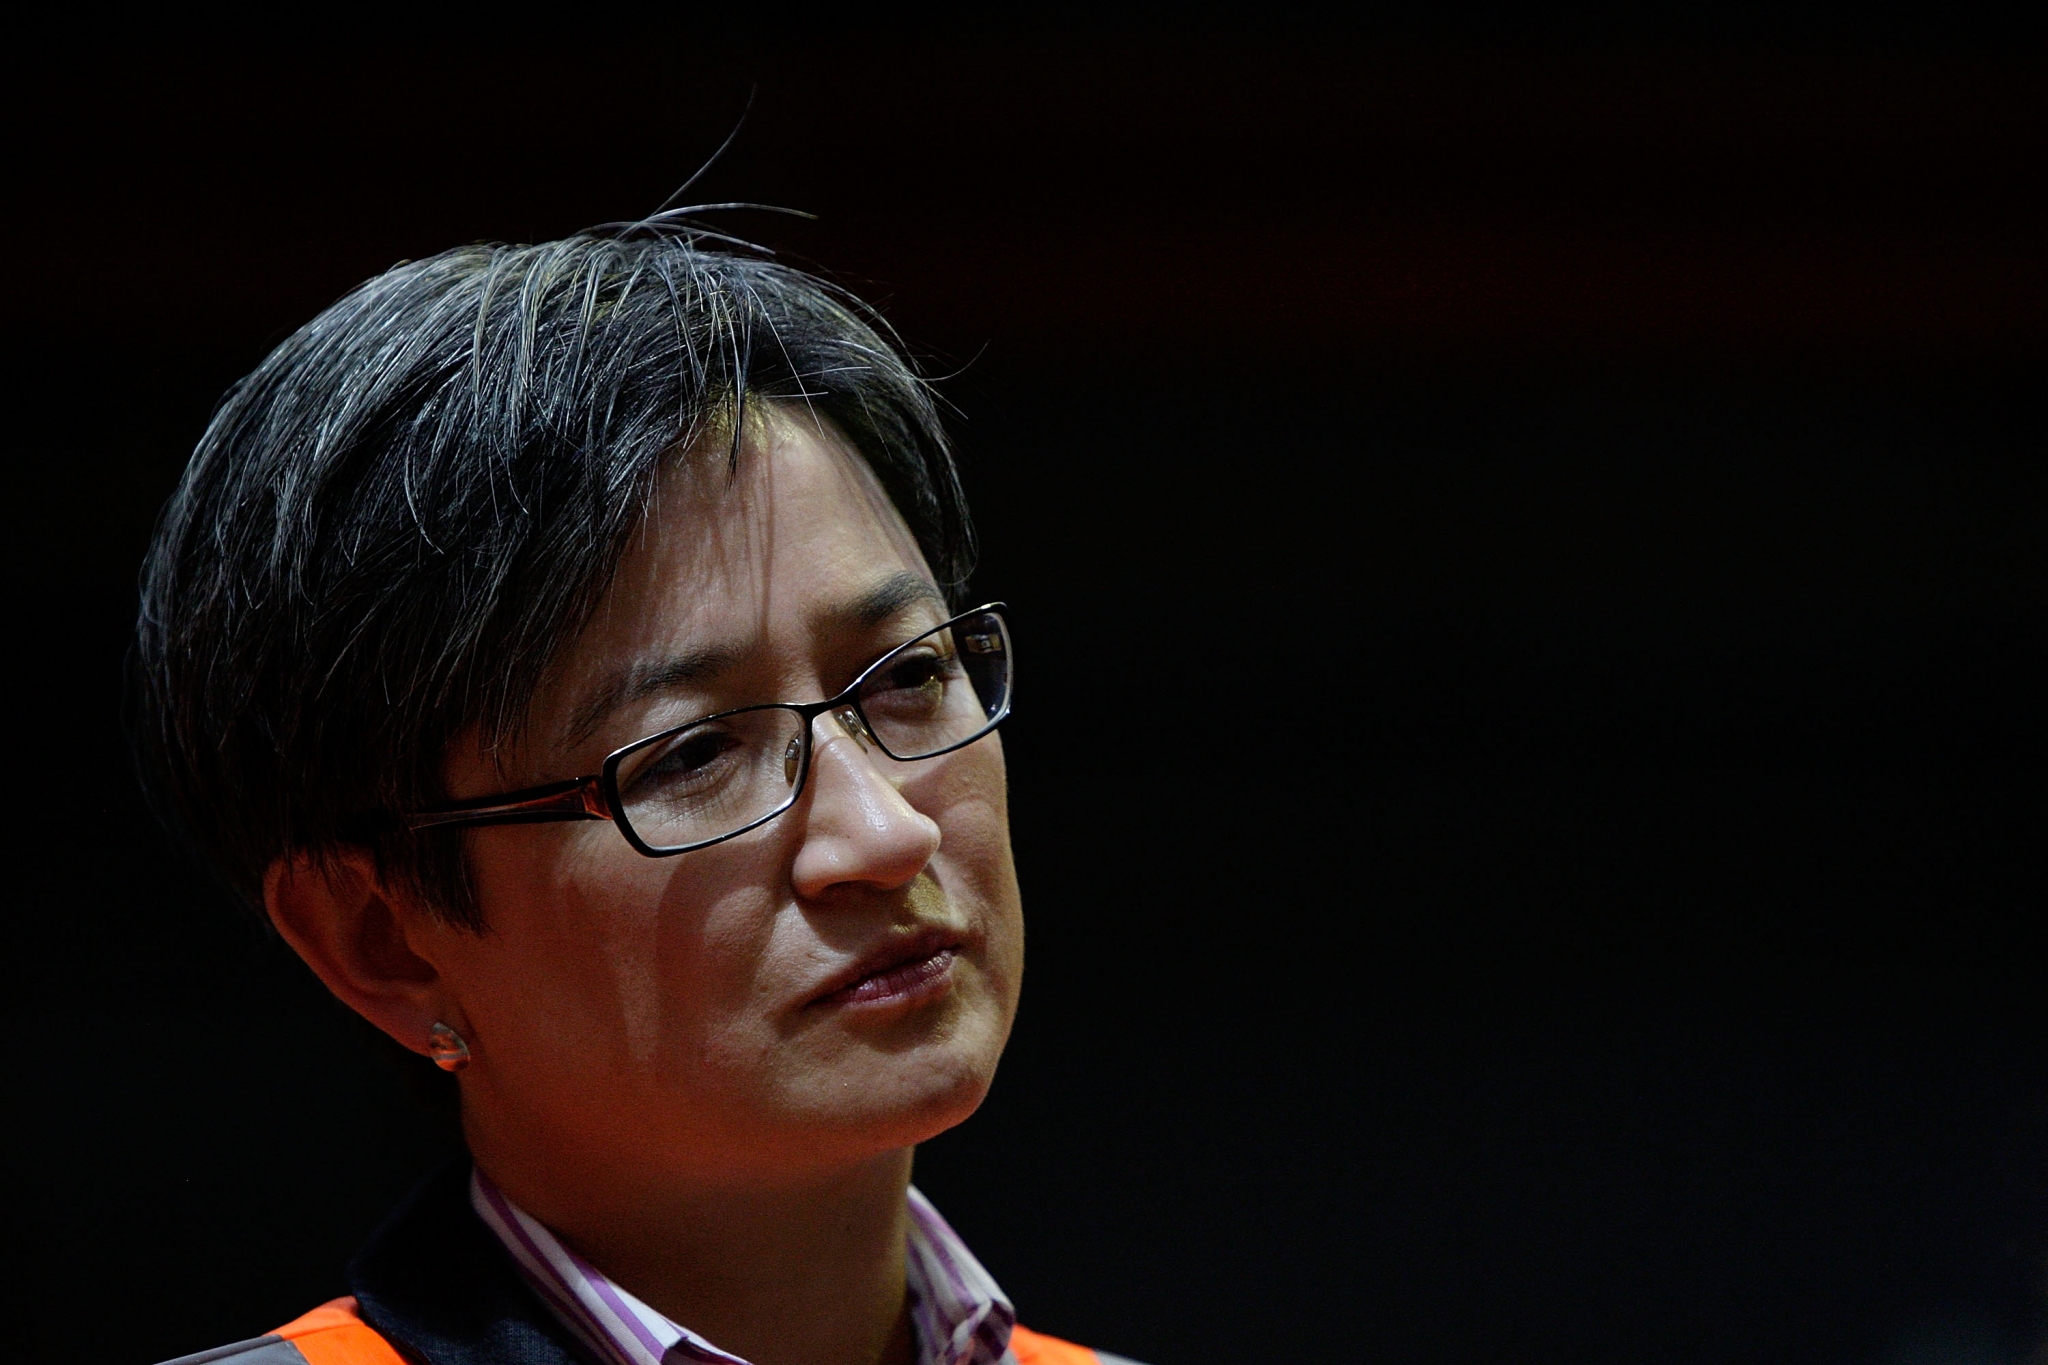 Australian Sen. Penny Wong claps back after being interrupted during senate hearing